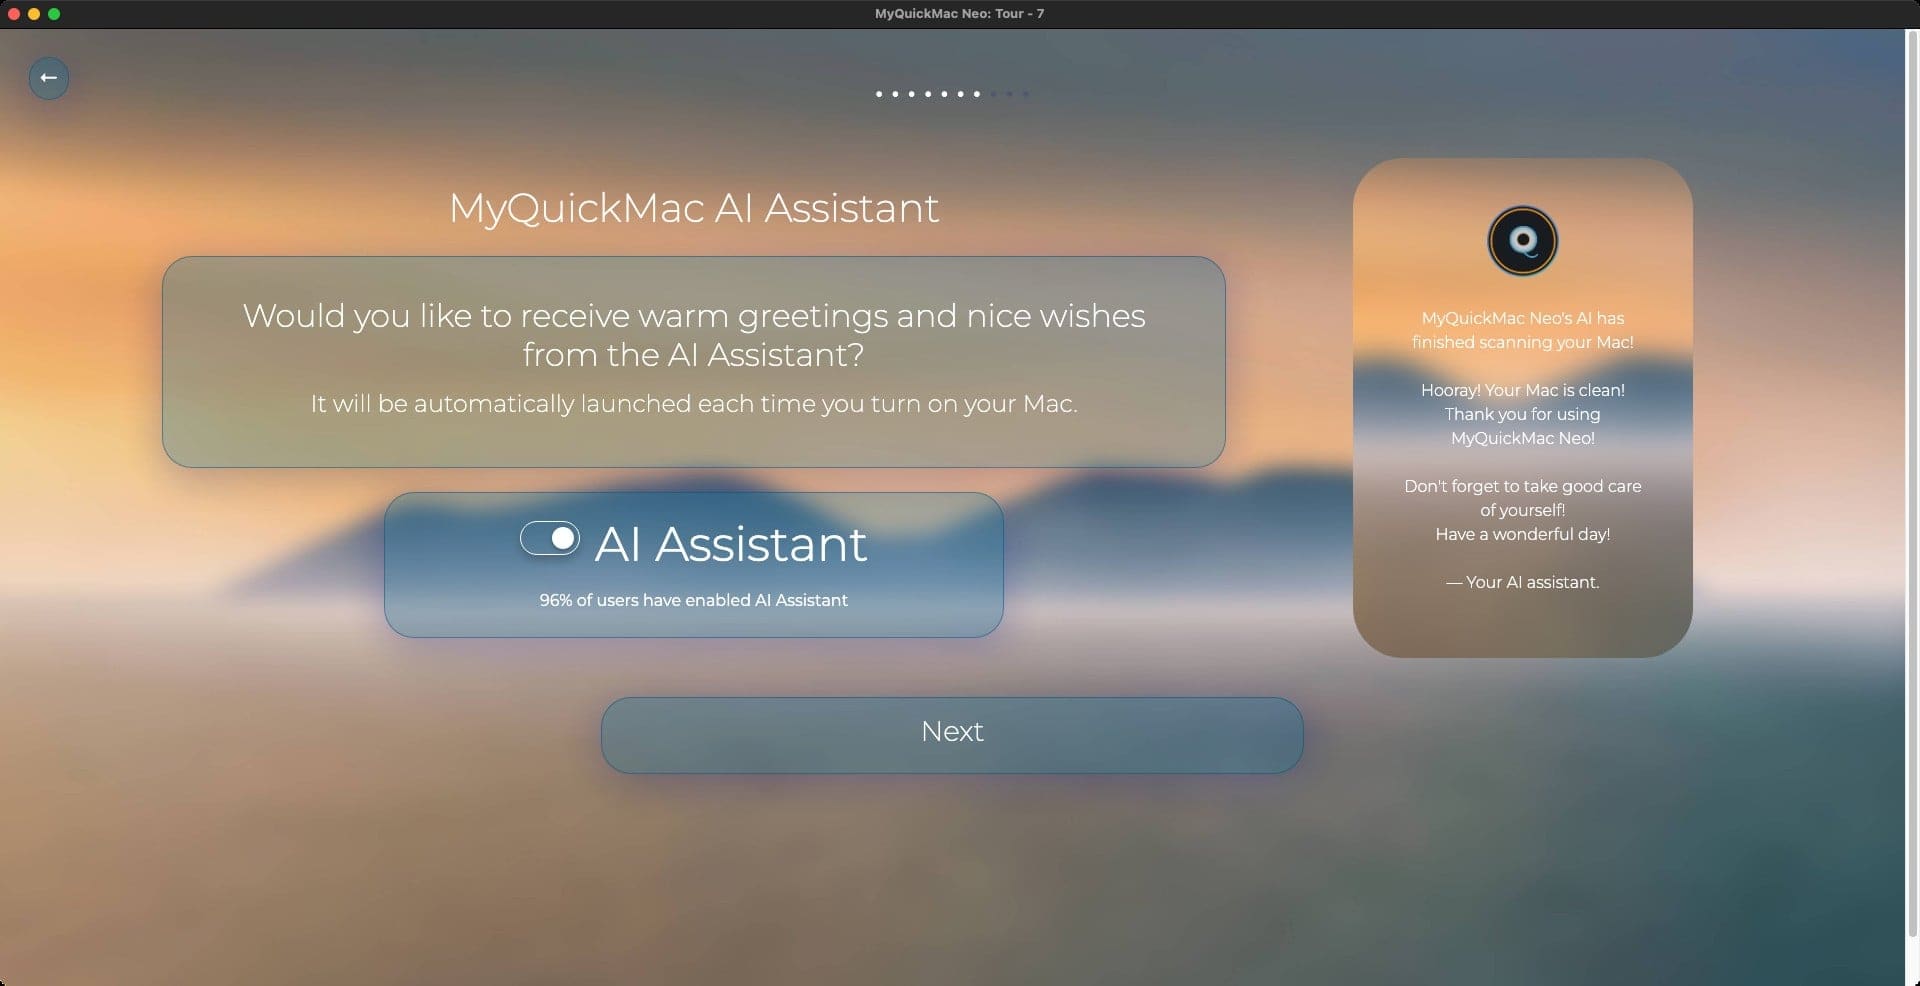 Screenshot of 'Setup Tour' window of MyQuickMac Neo that allows user to enable or disable the MyQuickMac AI Assistant